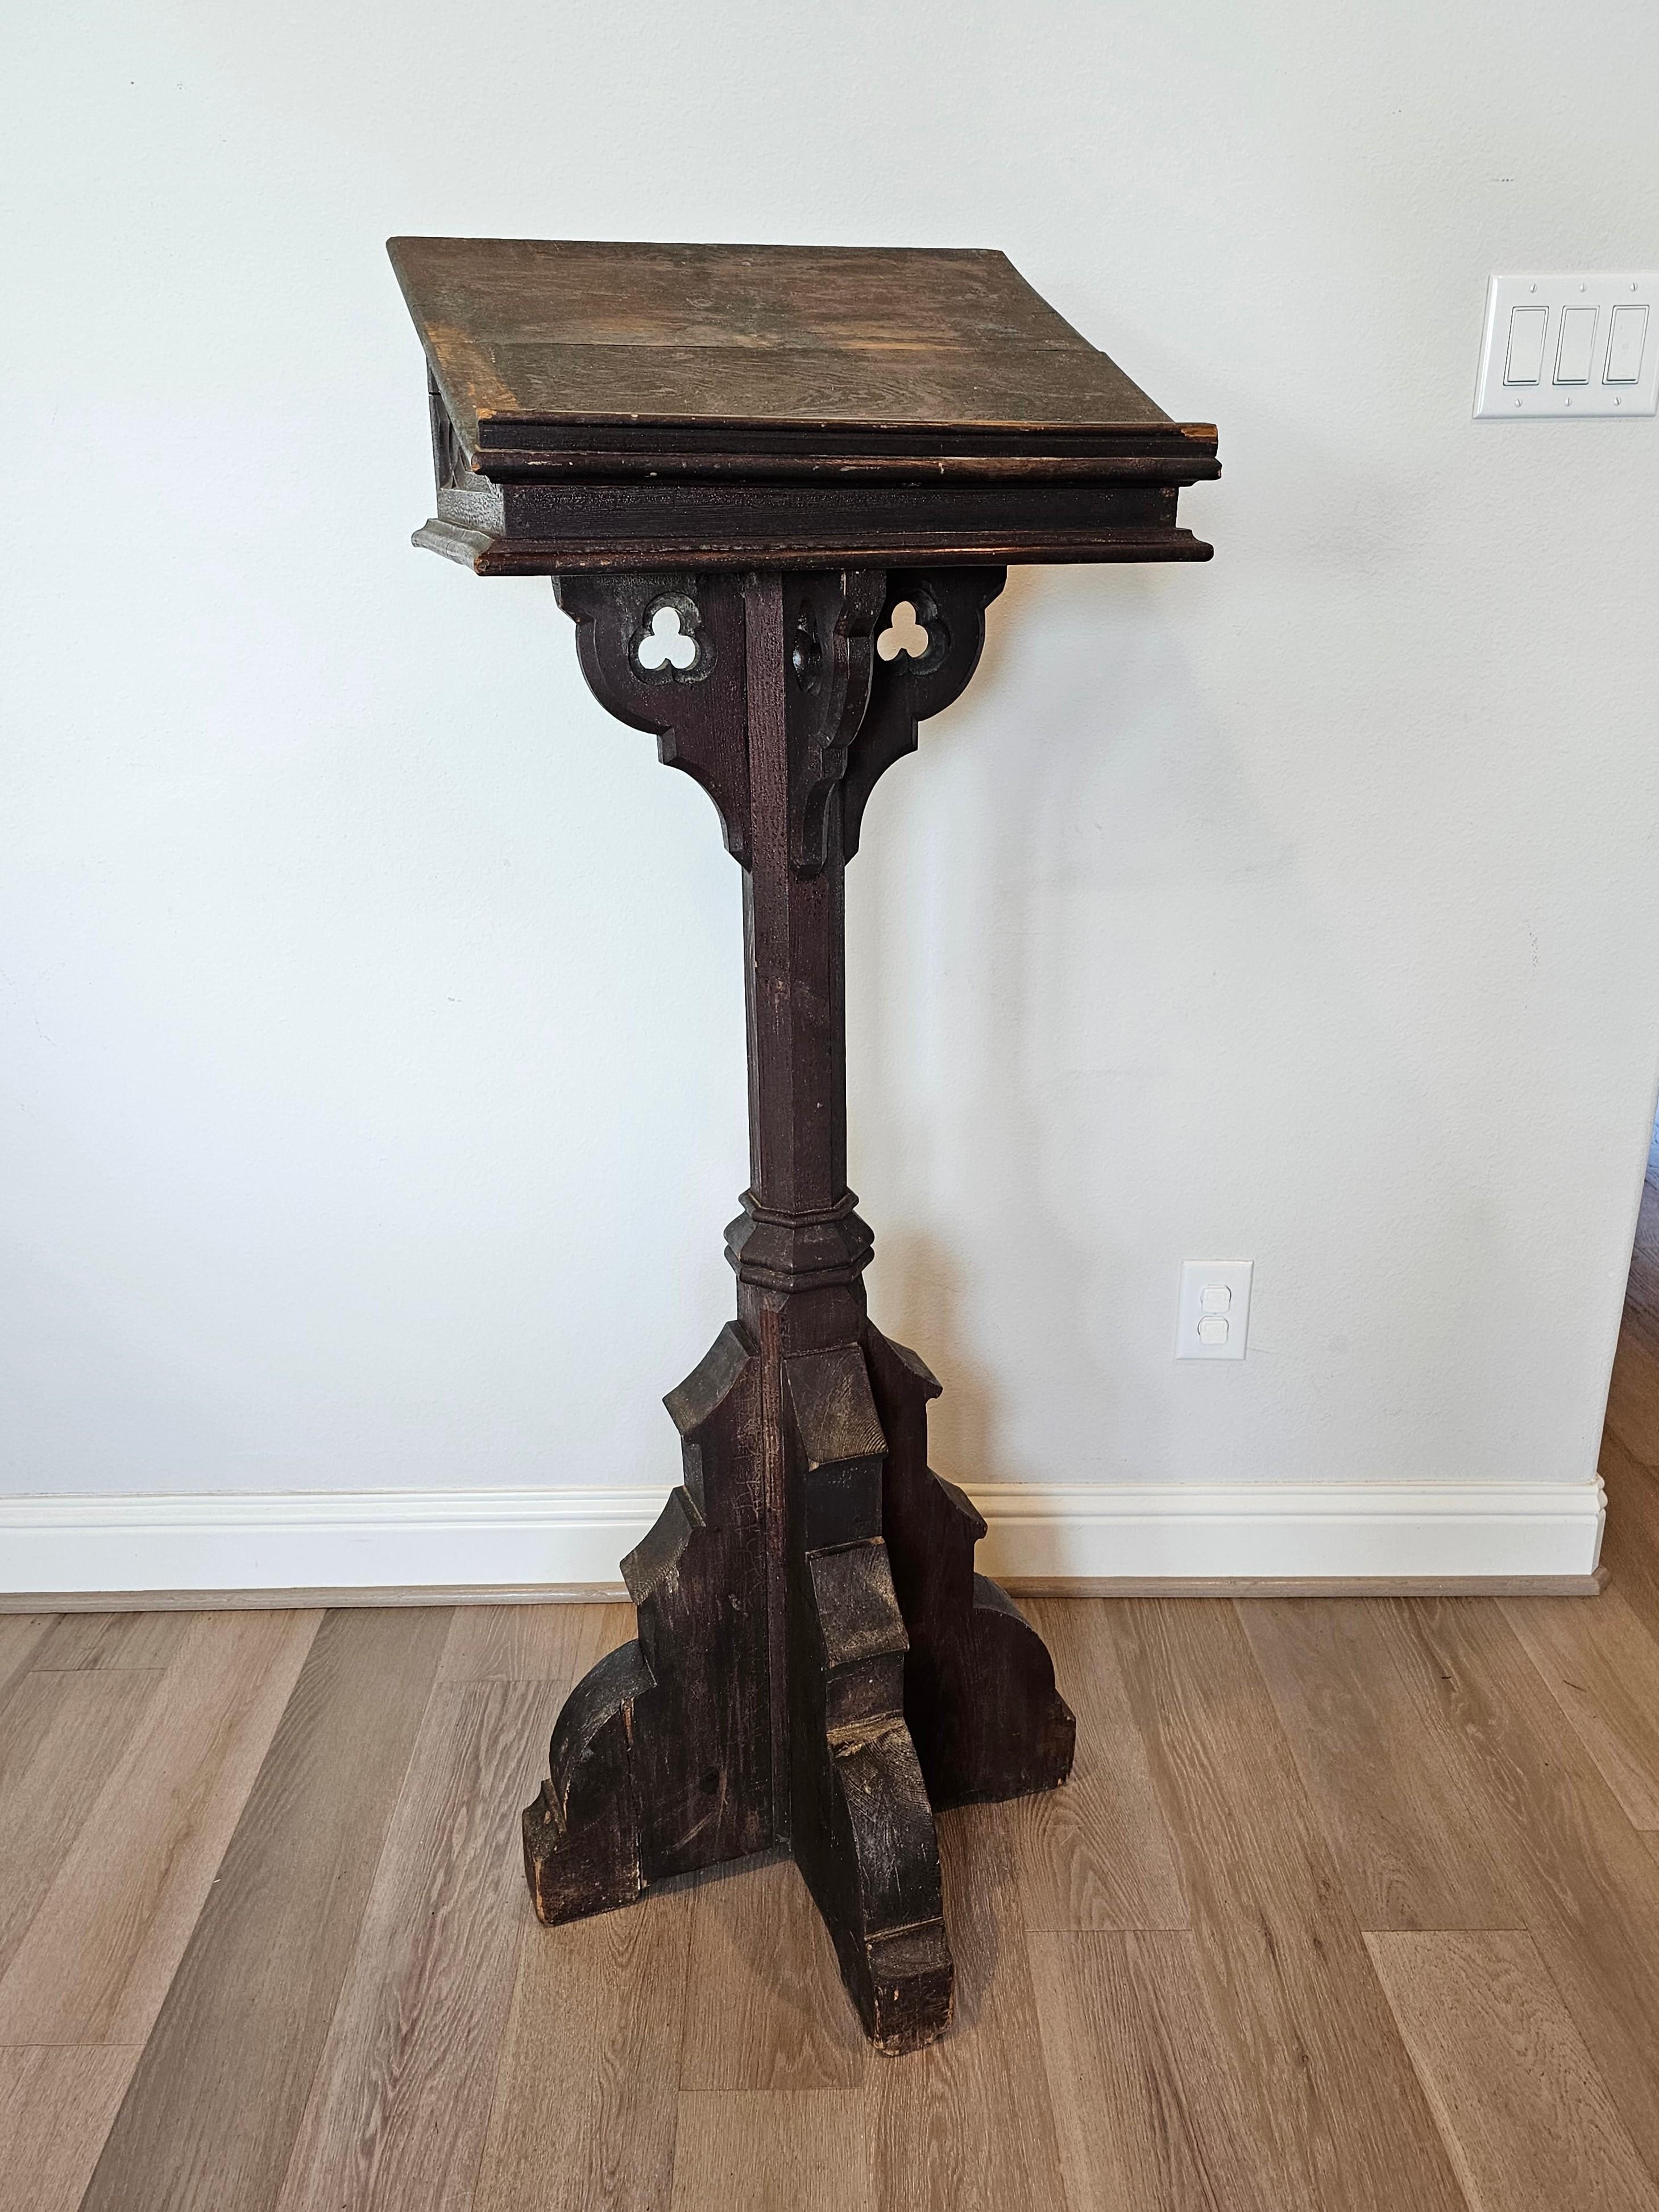 A monumental antique Victorian Gothic Revival carved oak church altar / synagogue lectern / book stand podium.

Hand-crafted in the 19th century, having a sloped book-rest to the top with three Star of David religious symbol carvings, rising on a